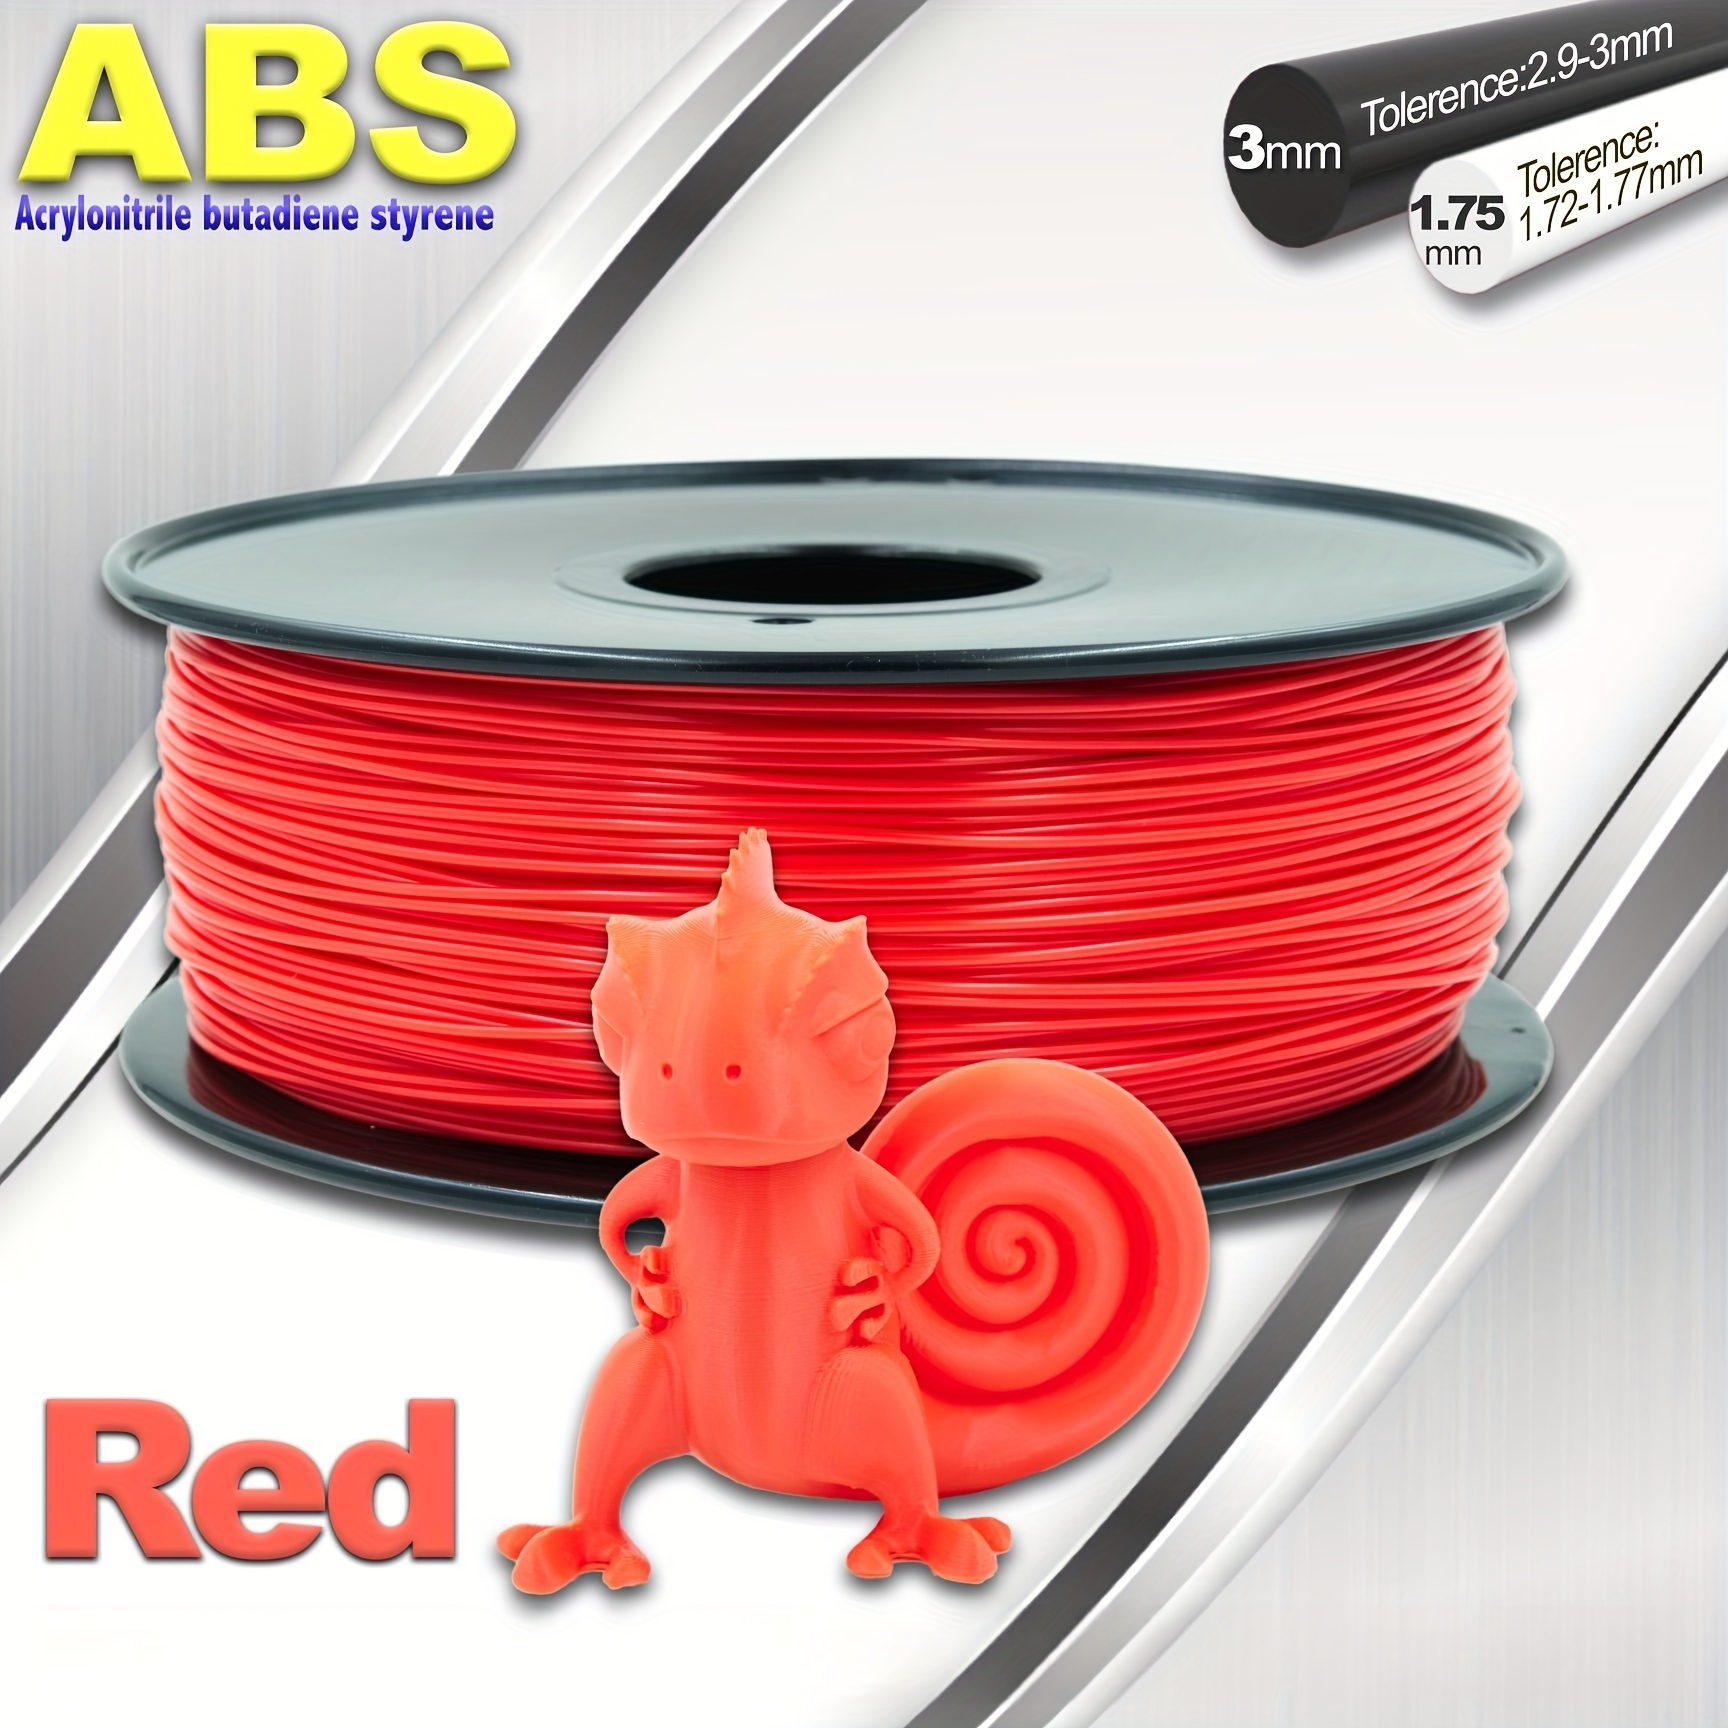 High speed Pla Filament Spool (2.2lbs) Durable And Resistant - Temu